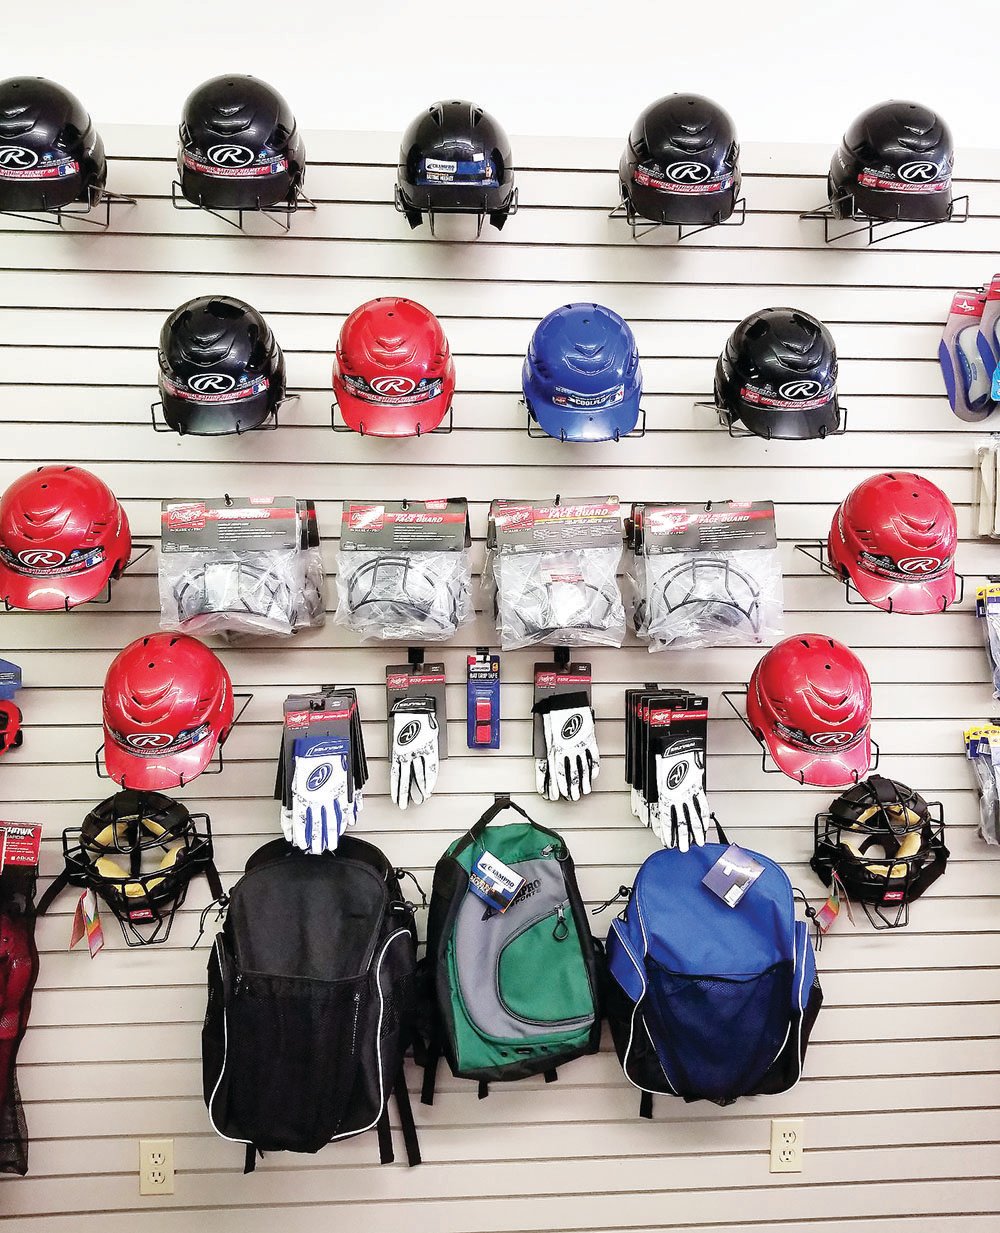 Championship Sports provided consumers with top-of-the line merchandise, including these Rawlings-brand helmets and batting gloves plus backpacks to carry gear for either softball or baseball. There also was an assortment of catcher's masks.